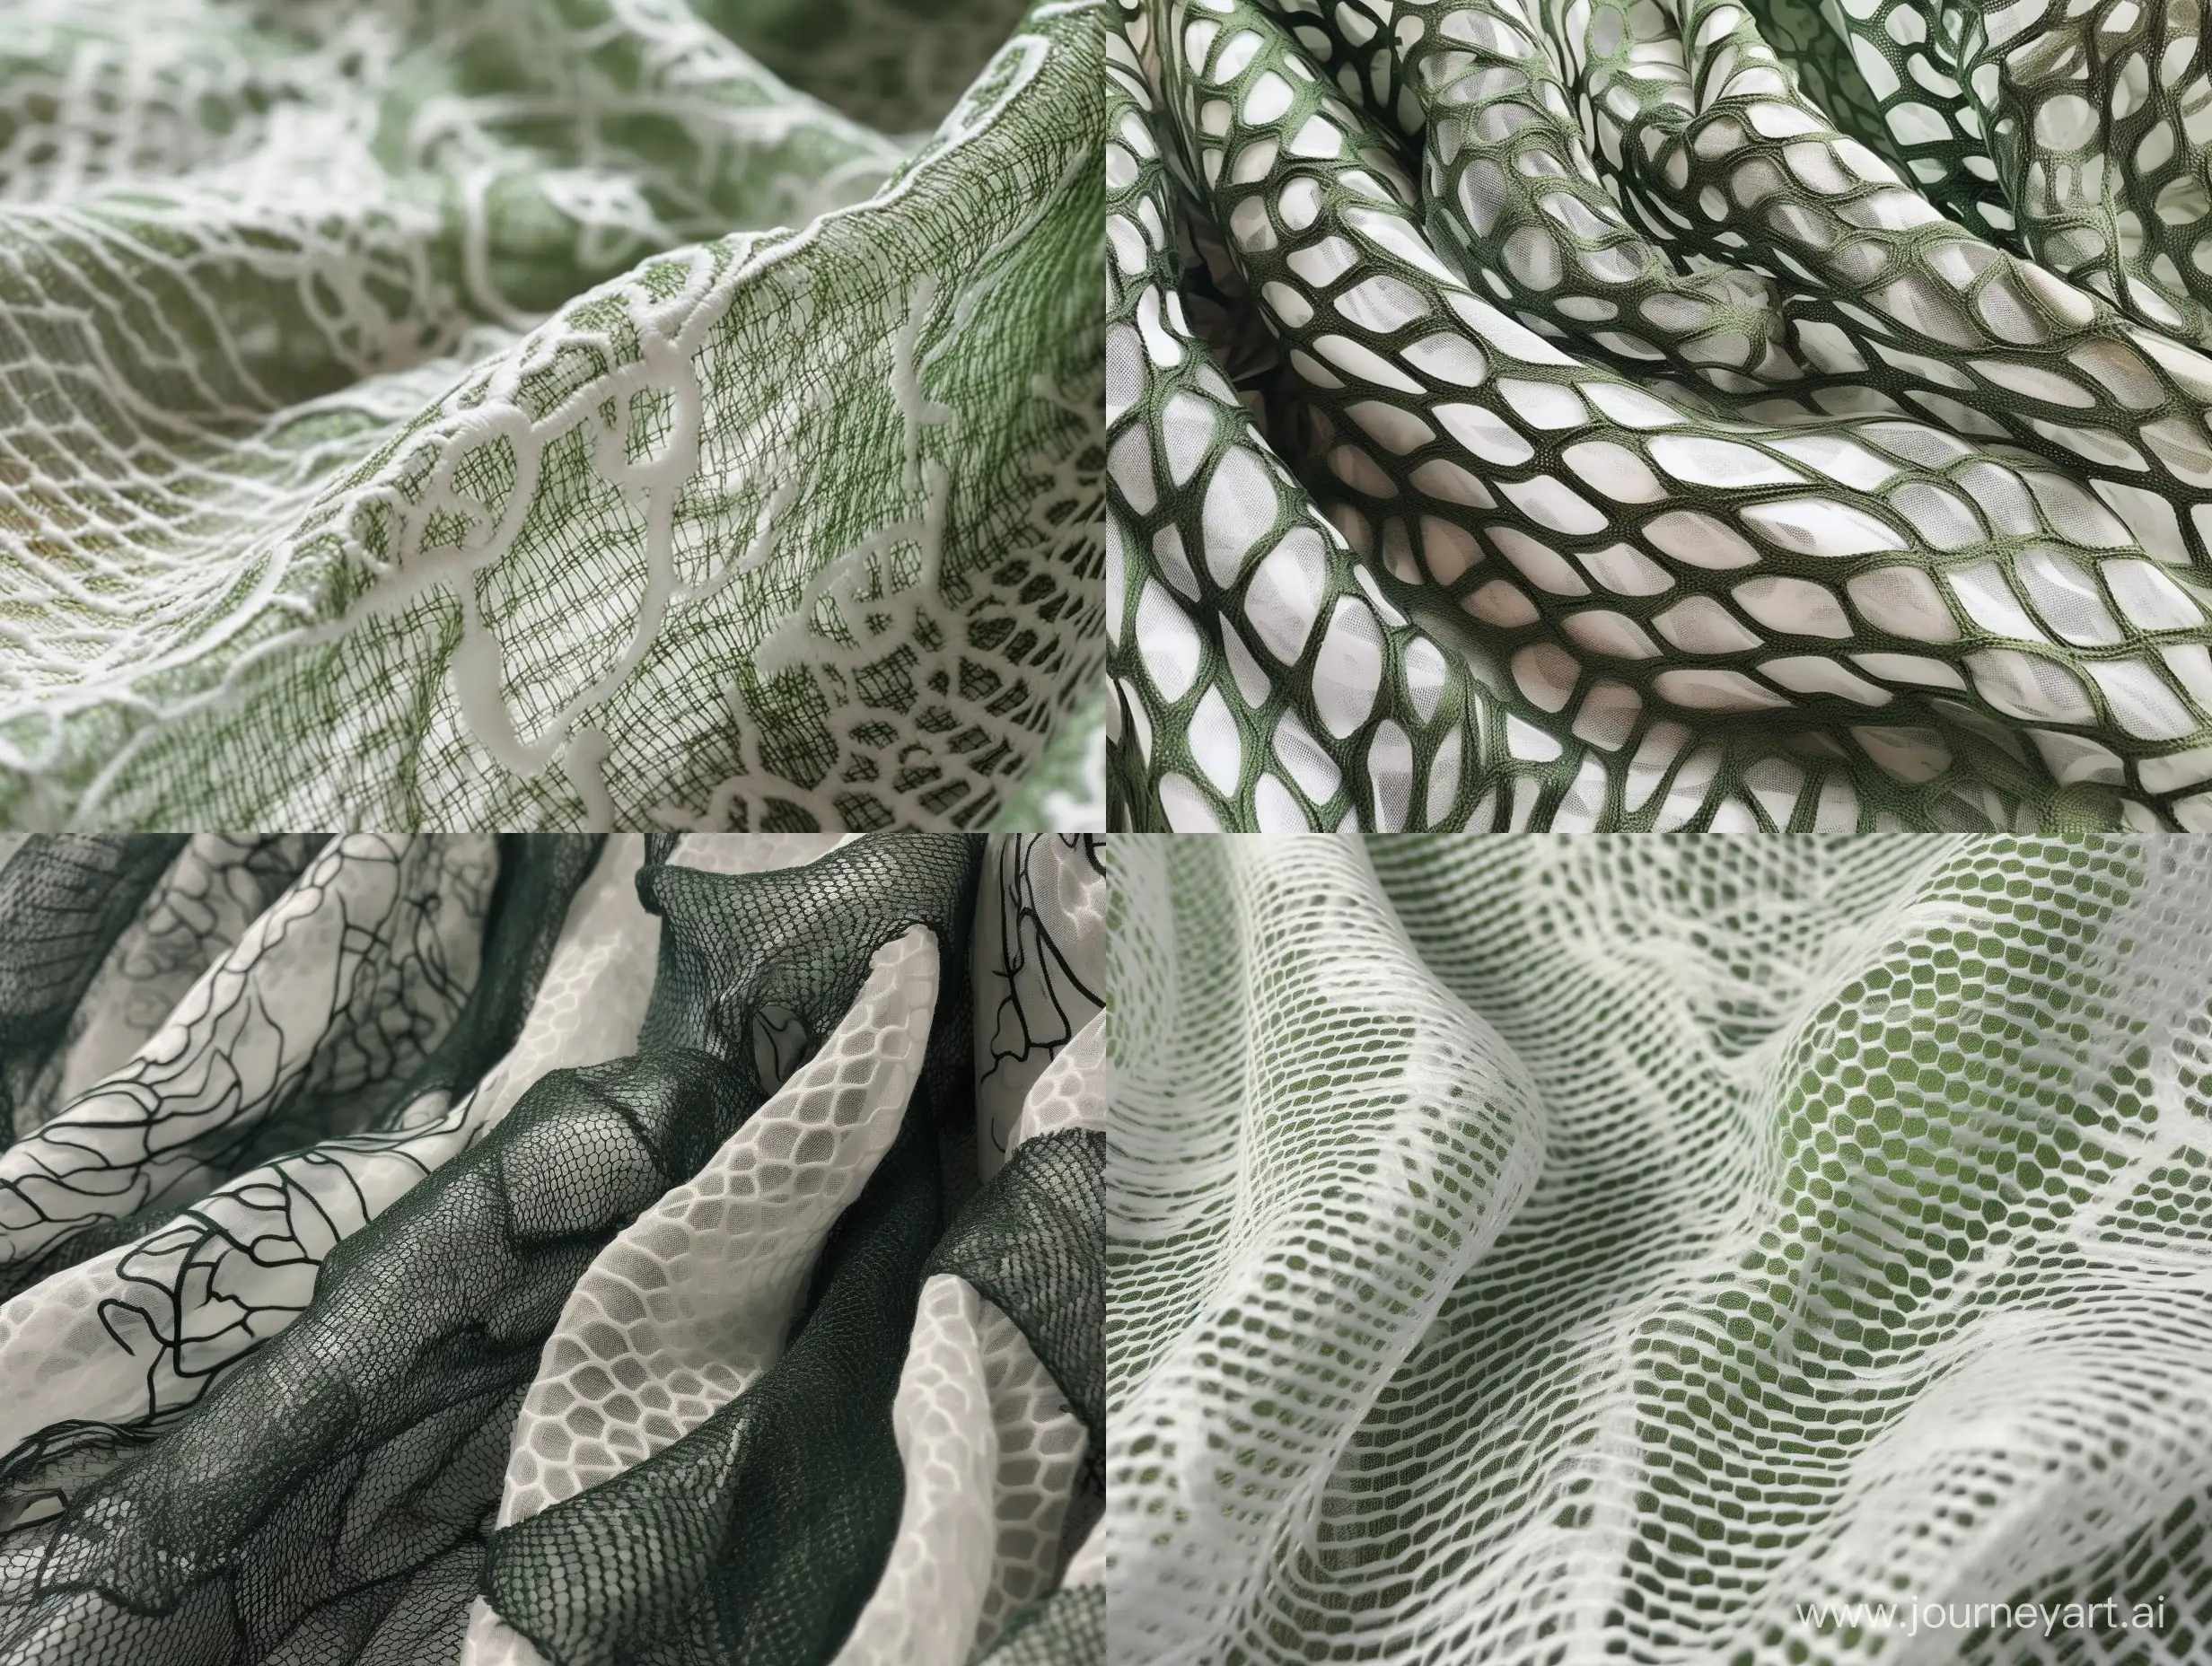 Ethereal-Green-and-White-Mesh-Art-Captivating-Figura-Serpentinata-in-Holotone-Print